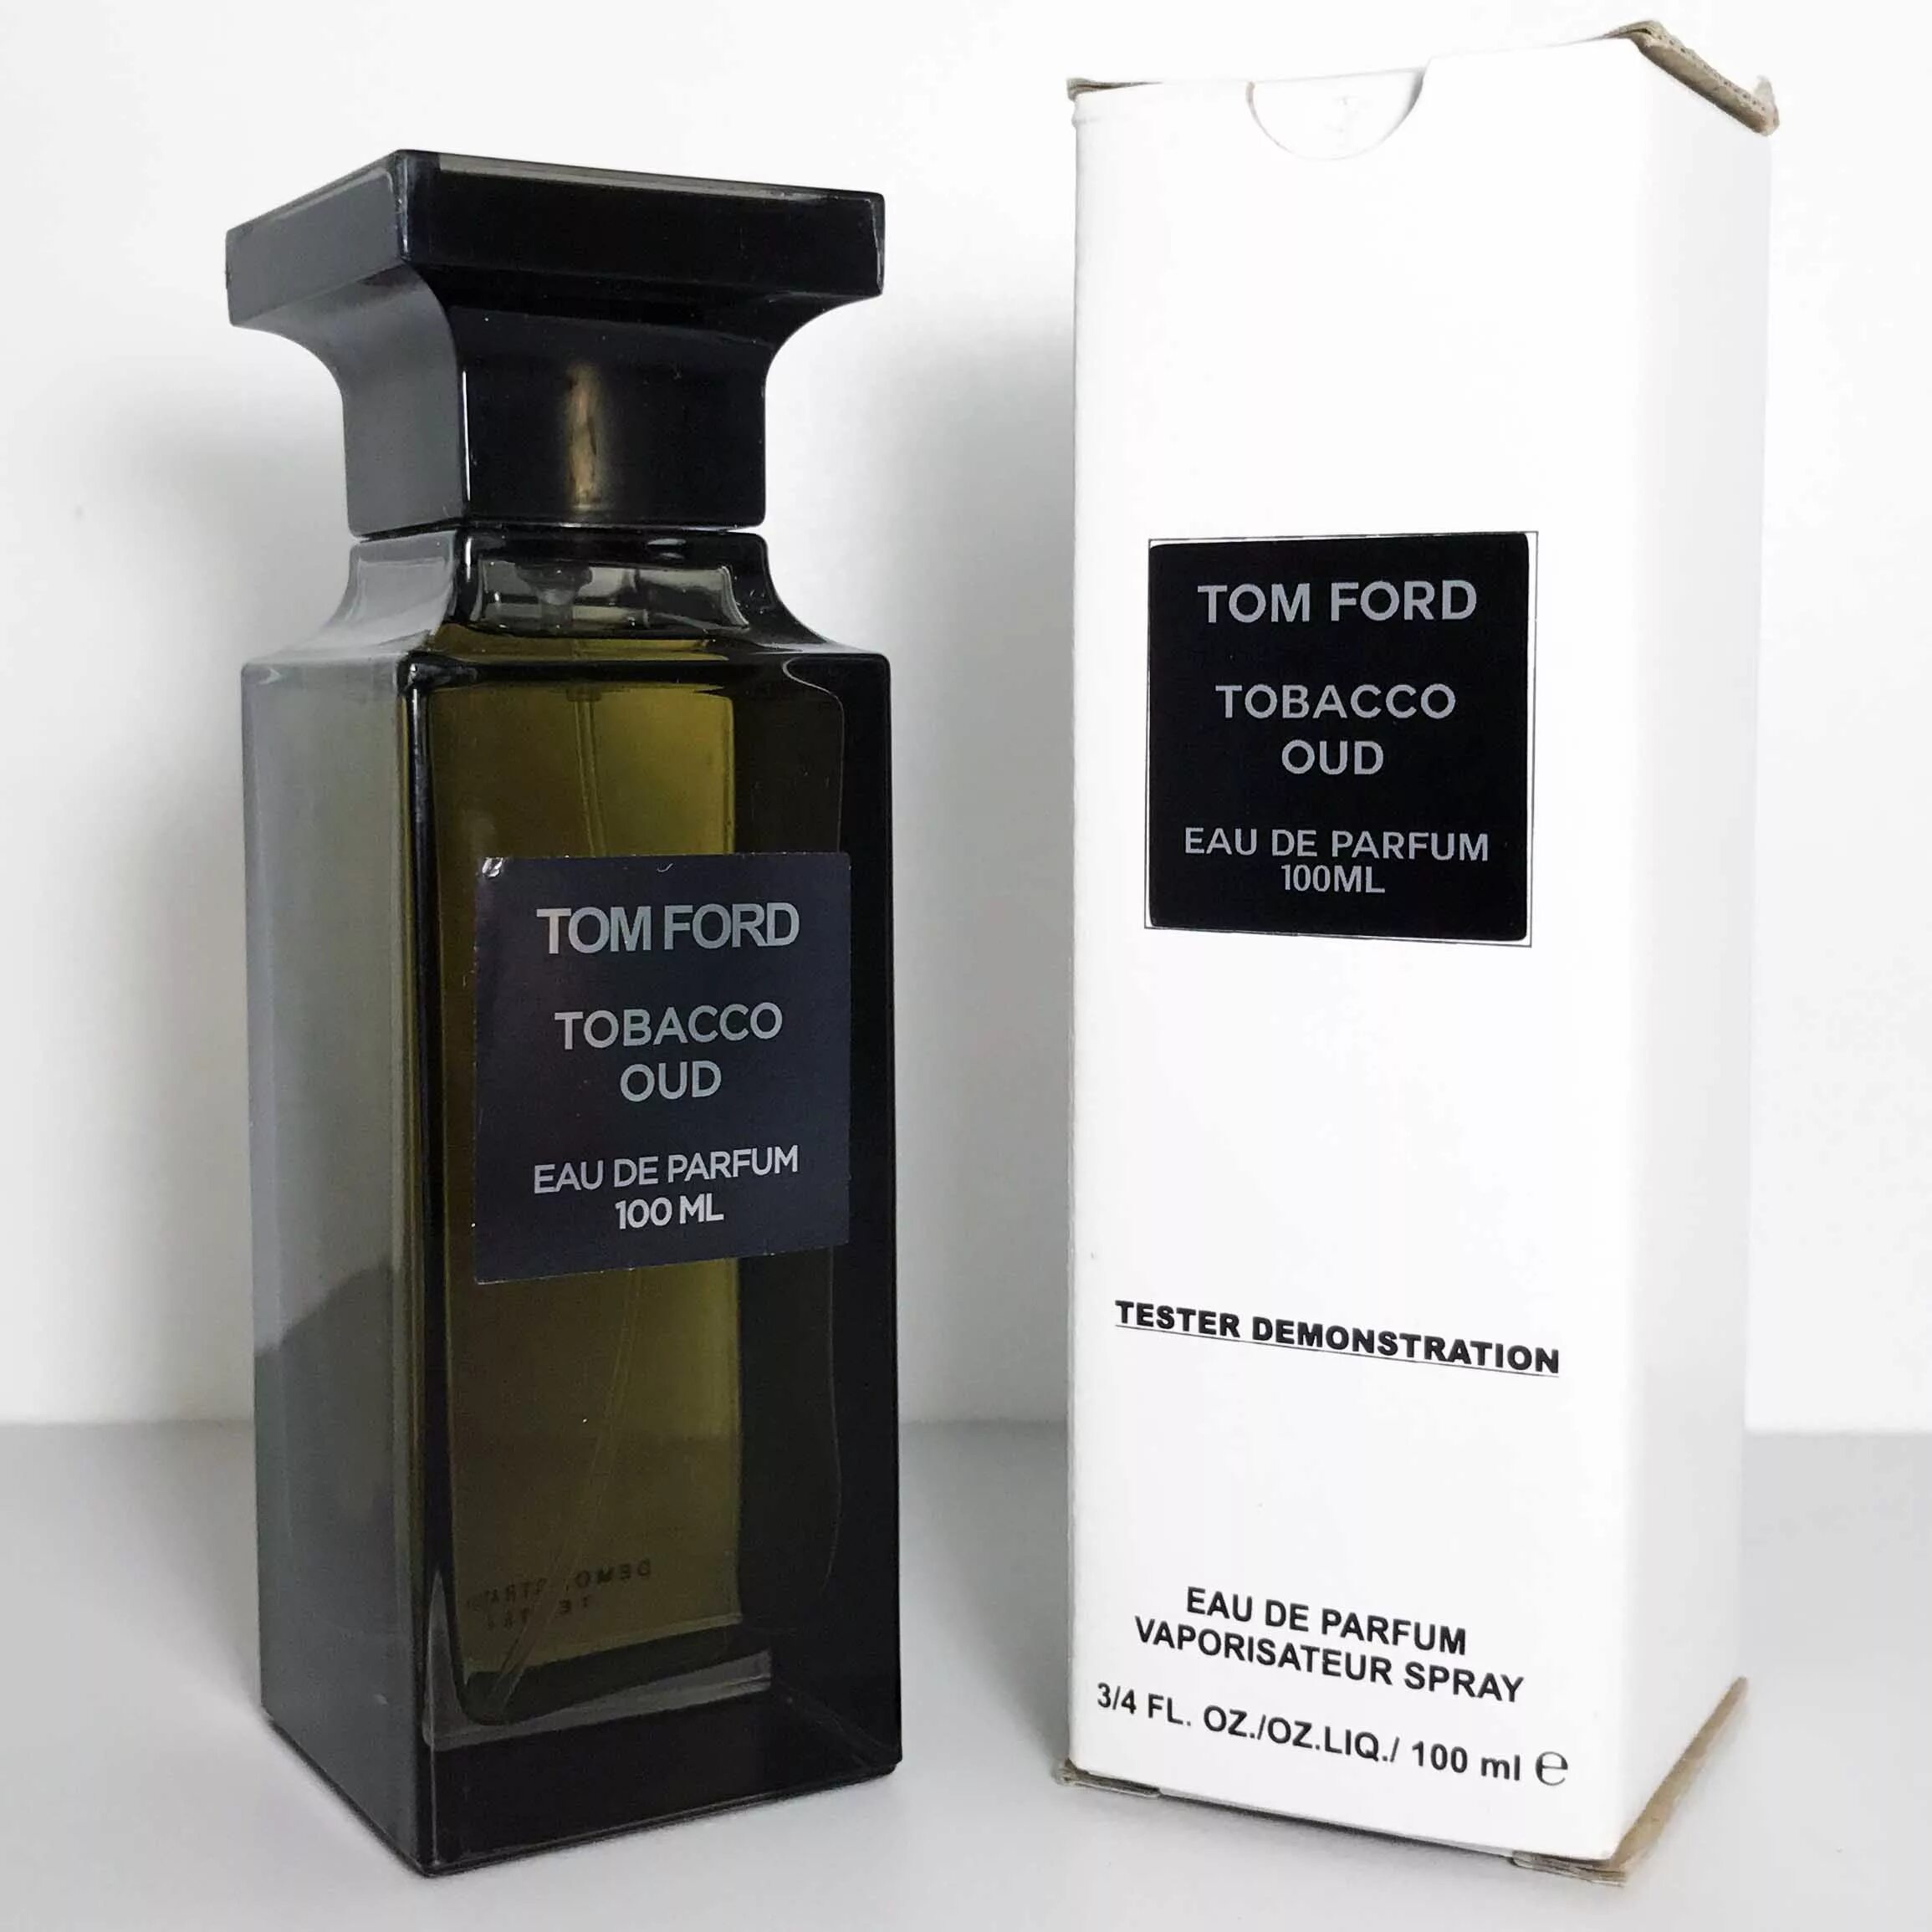 Tom Ford Tobacco oud 100ml. Tom Ford Tobacco oud 100. Tom Ford Tobacco Vanille. Том Форд табако ОУД.